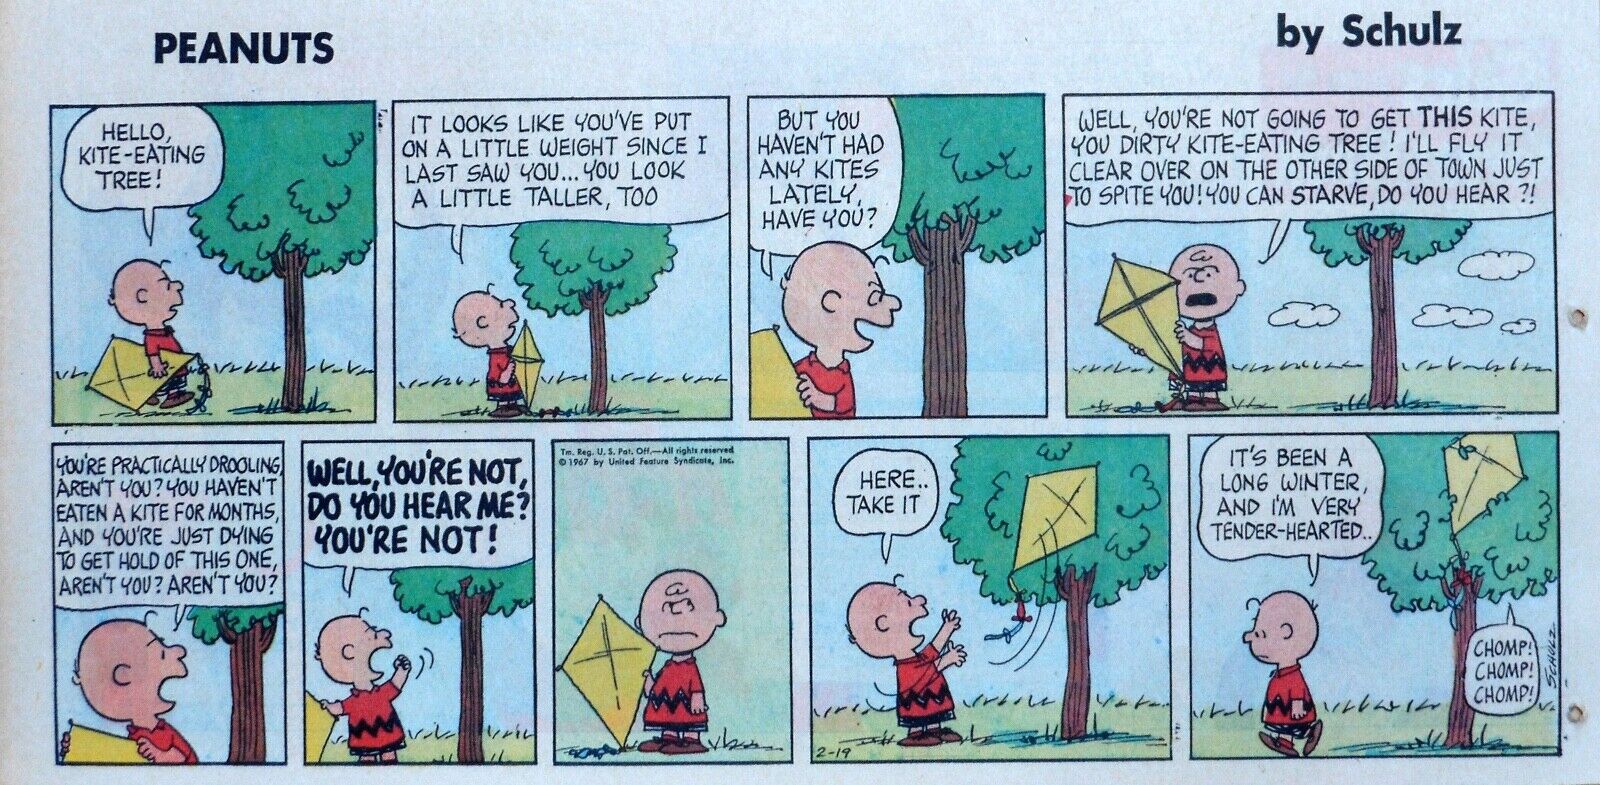 Peanuts by Charles Schulz - full color Sunday comic page - February 19, 1967